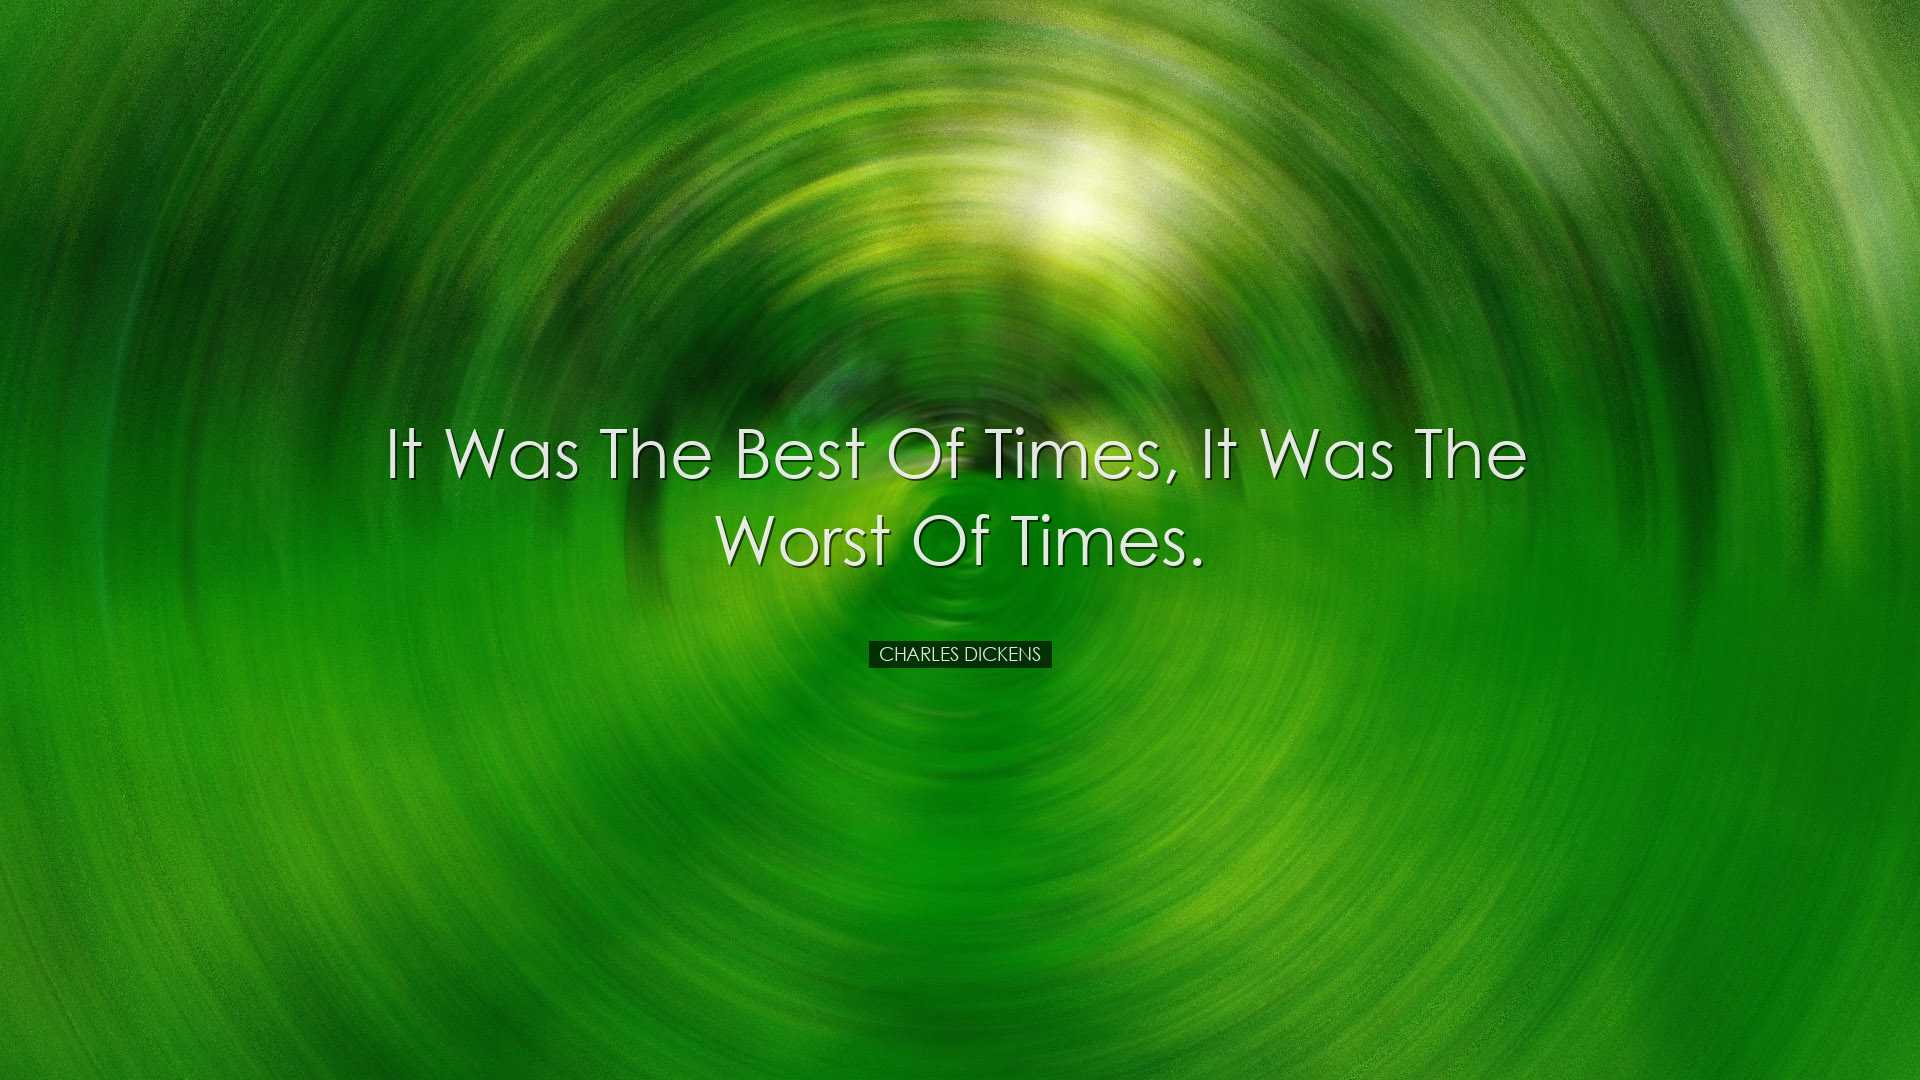 It was the best of times, it was the worst of times. - Charles Dic